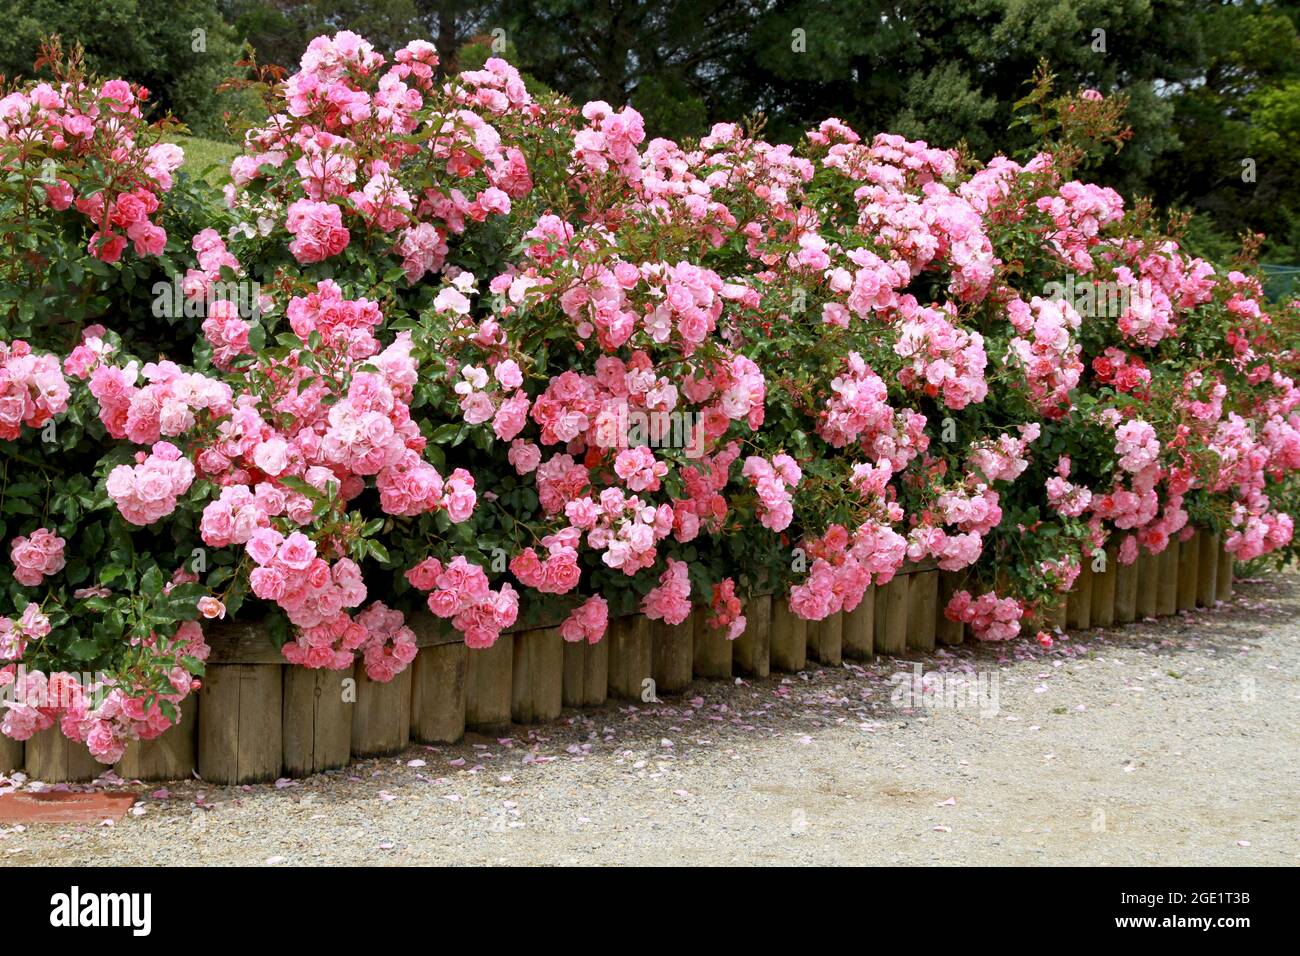 A garden bed of pink roses. Stock Photo